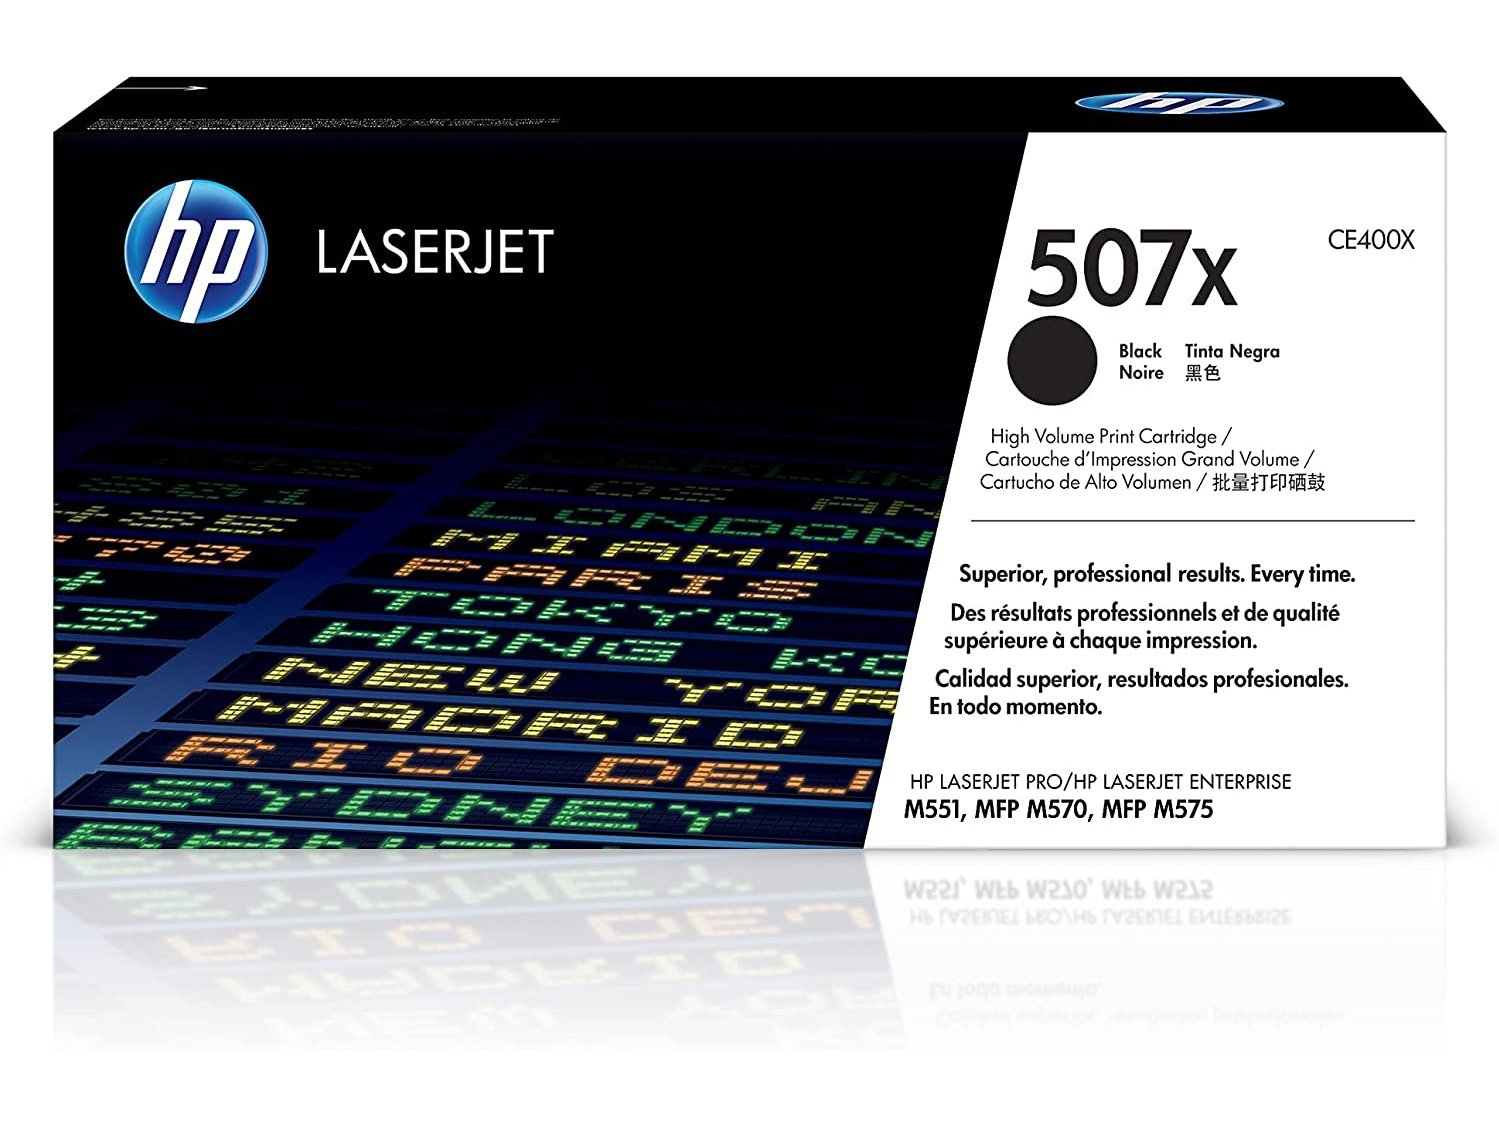 ICU Compatible/ OEM Get HP ICUCE400X Yields 11000 Pages CE400X Toner Cartridge Black - 507X - High Yield